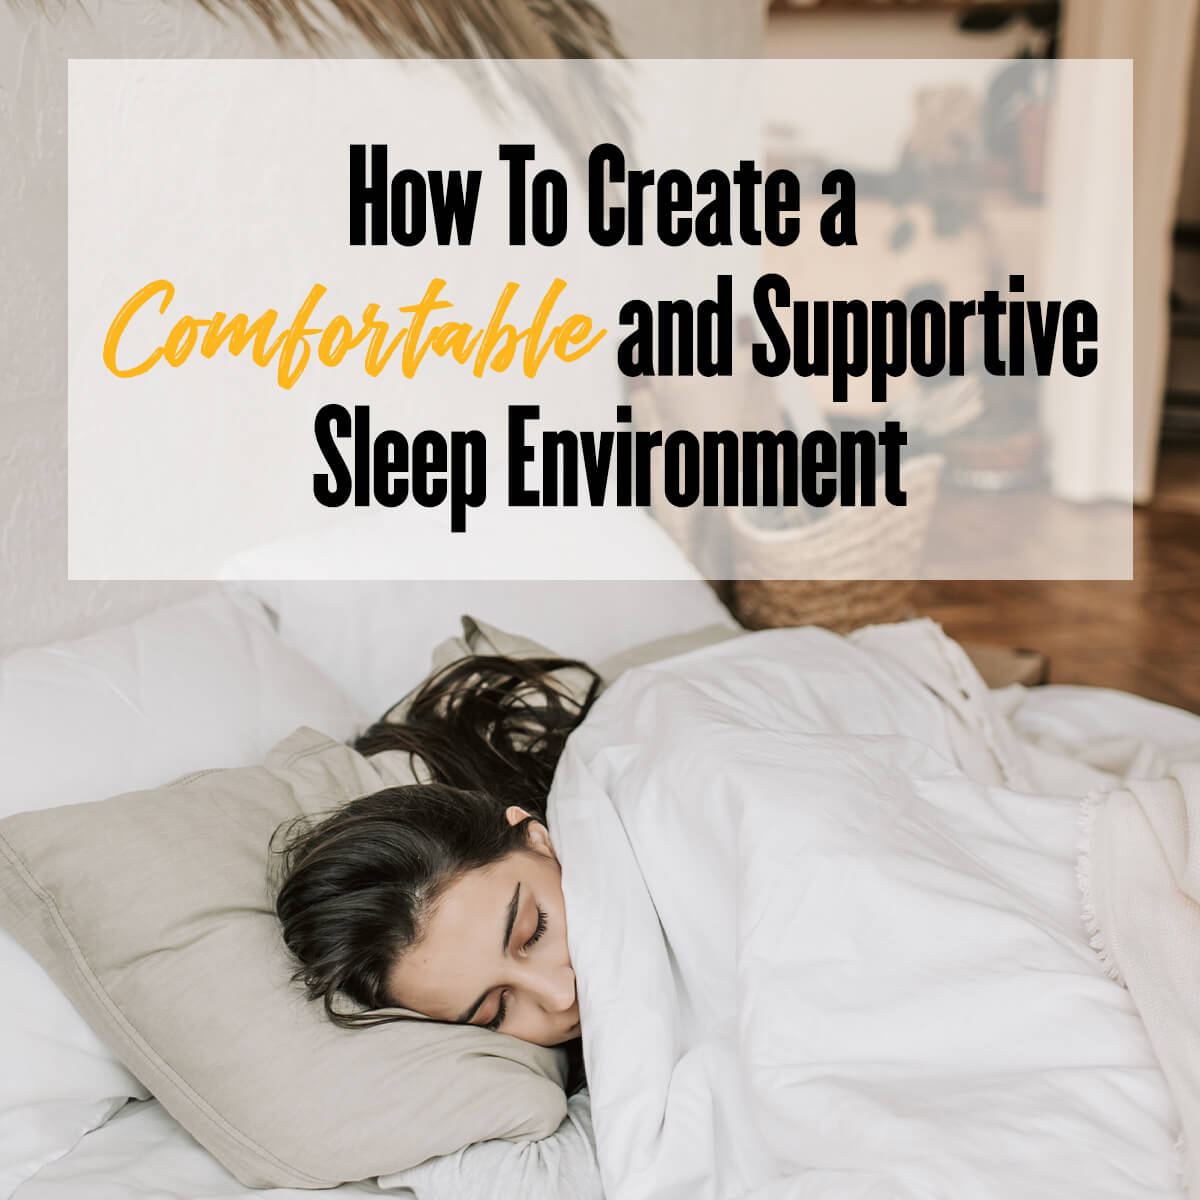 How To Create a Comfortable and Supportive Sleep Environment